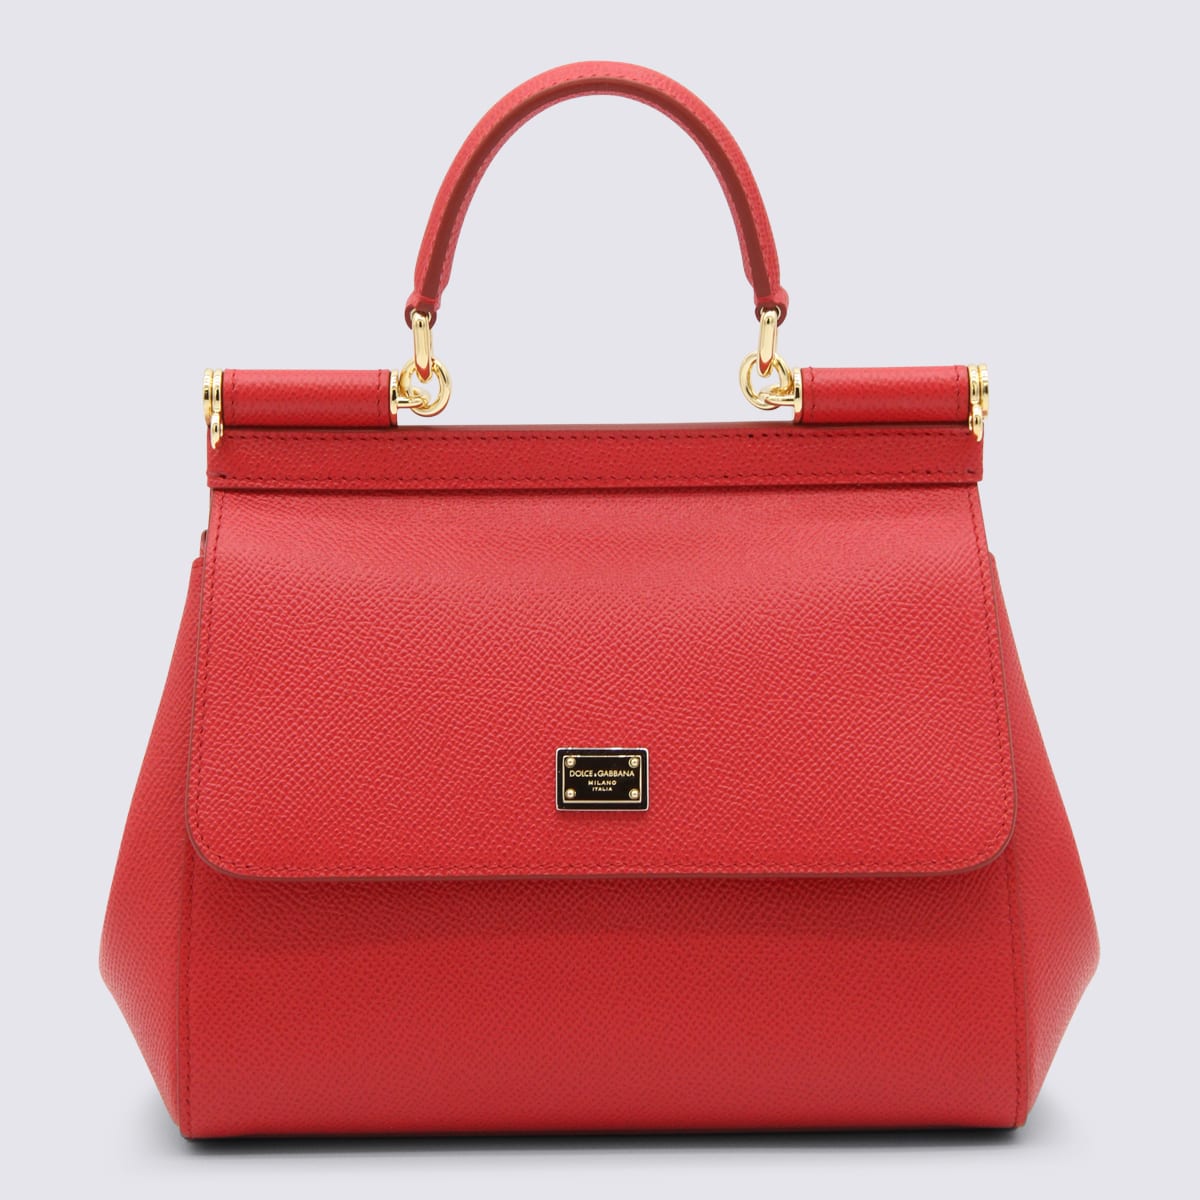 Dolce & Gabbana Red Leather Sicily Handle Bag